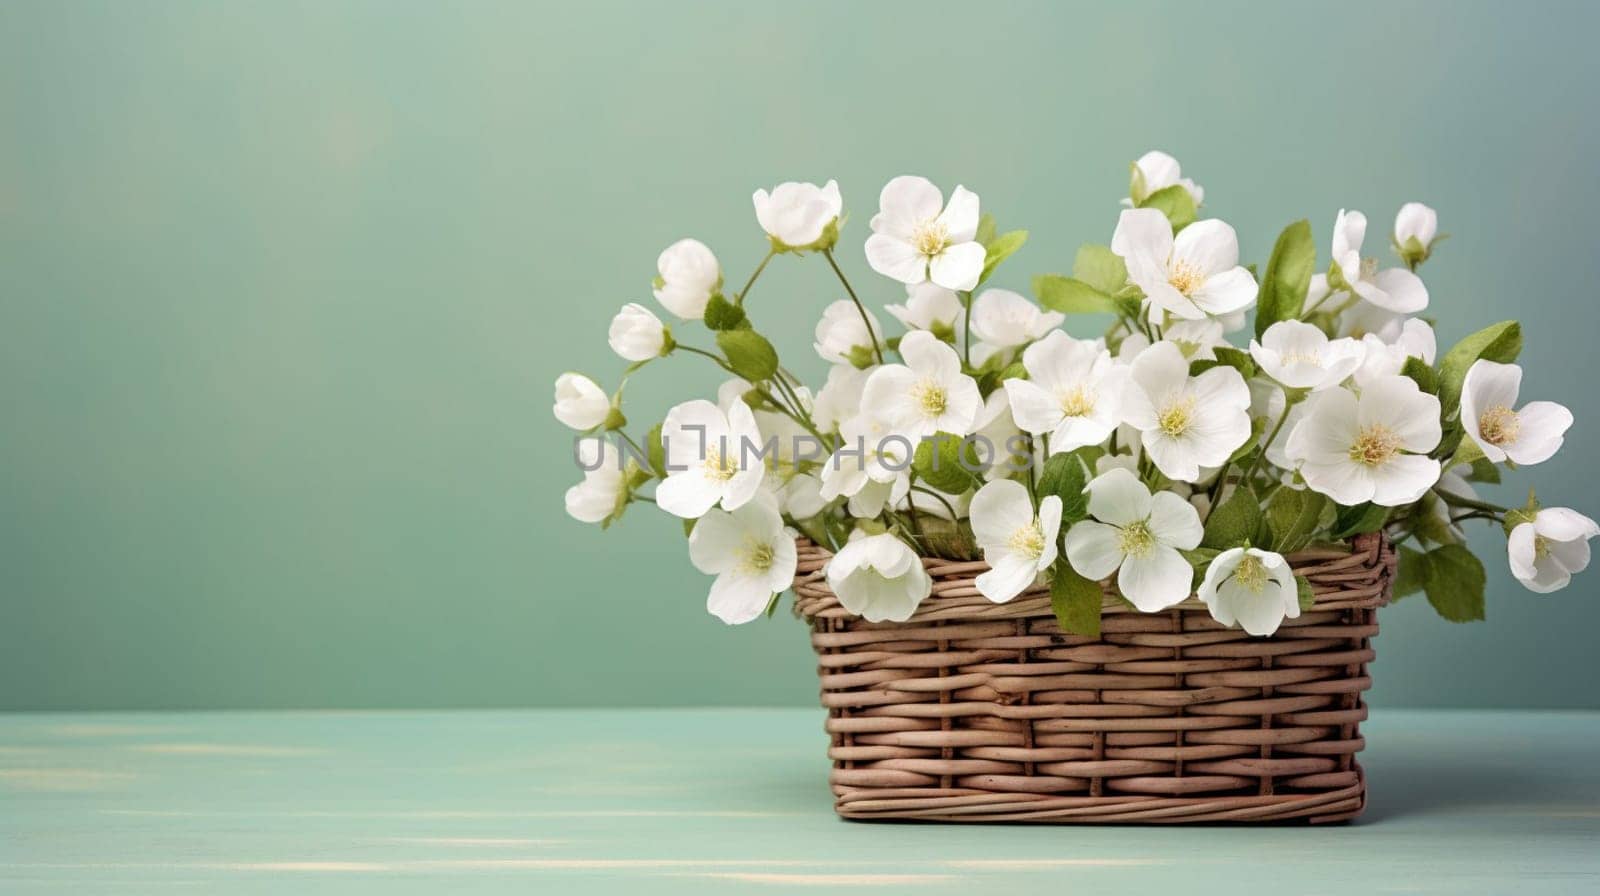 Basket of white flowers on wooden surface against green background. High quality photo